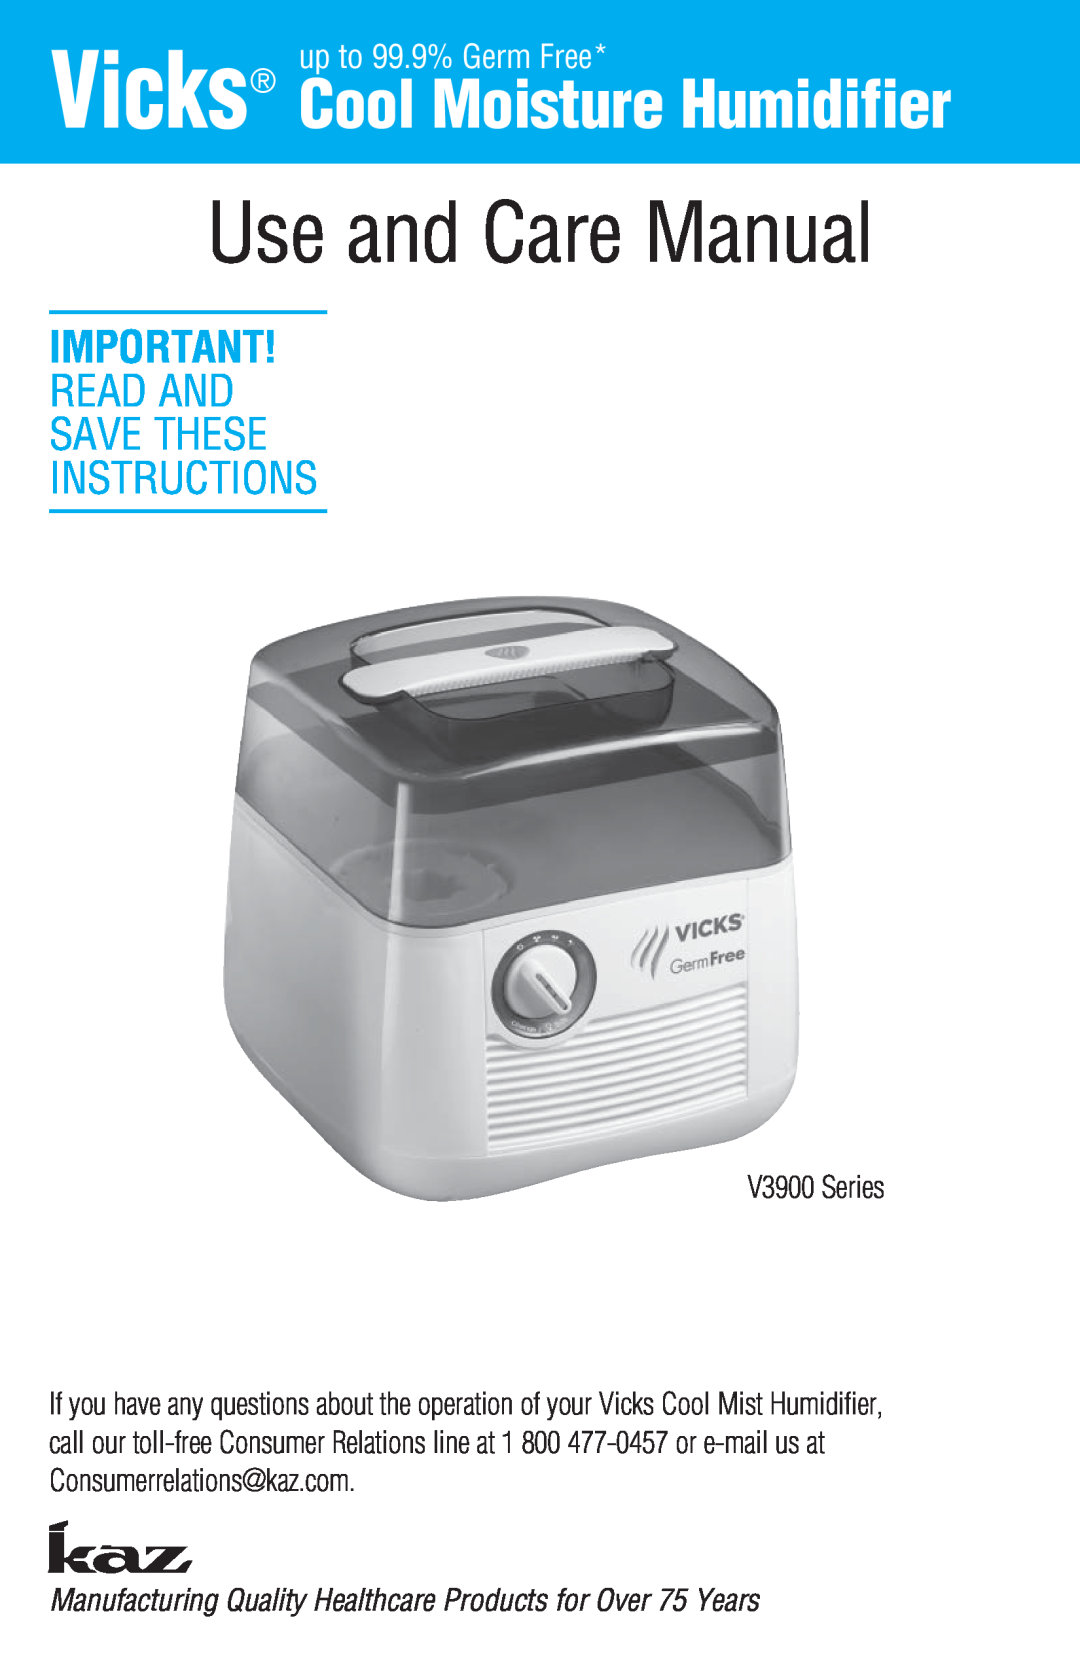 Kaz manual Read And Save These Instructions, up to 99.9% Germ Free, V3900 Series, Use and Care Manual 